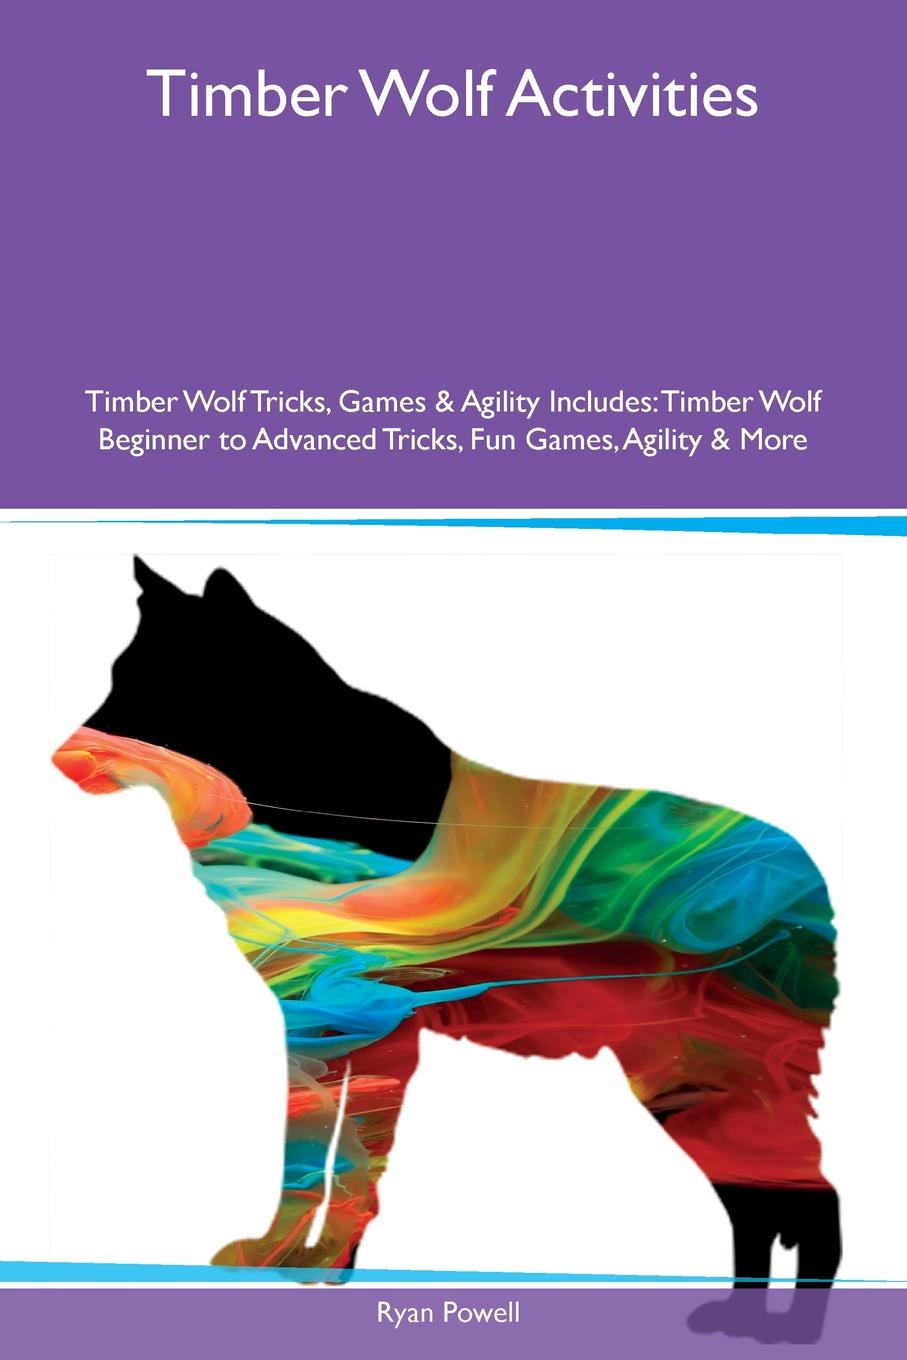 Timber Wolf Activities Timber Wolf Tricks, Games & Agility Includes. Timber Wolf Beginner to Advanced Tricks, Fun Games, Agility & More